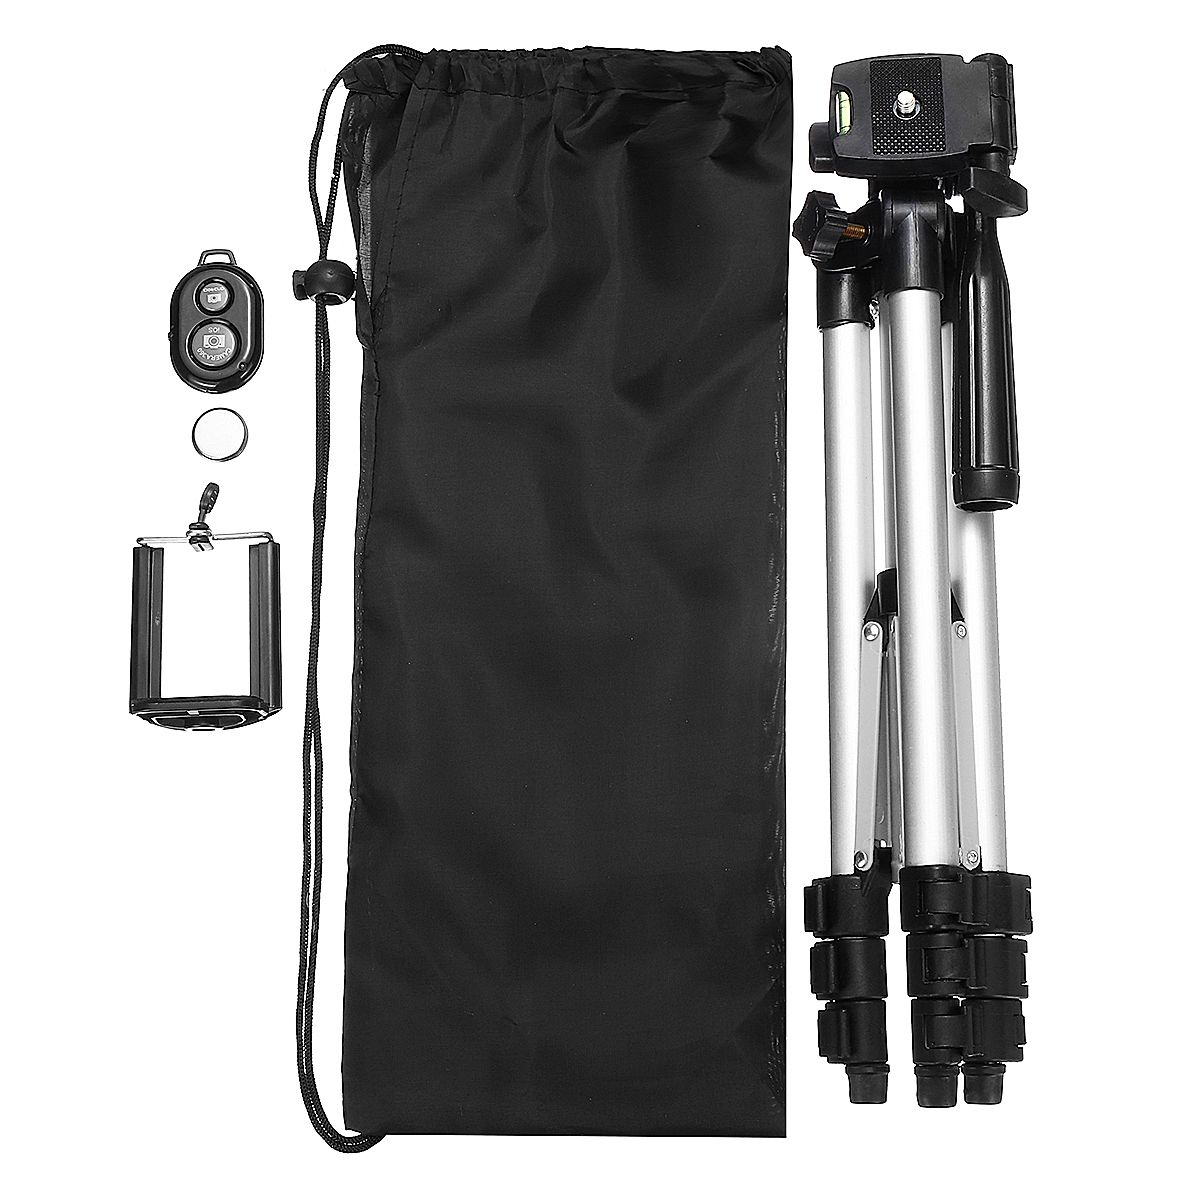 Adjustable-Holder-Telescopic-Tripod-Stand-Kits-with-bluetooth-Control-for-Camera-Mobile-Phone-1289378